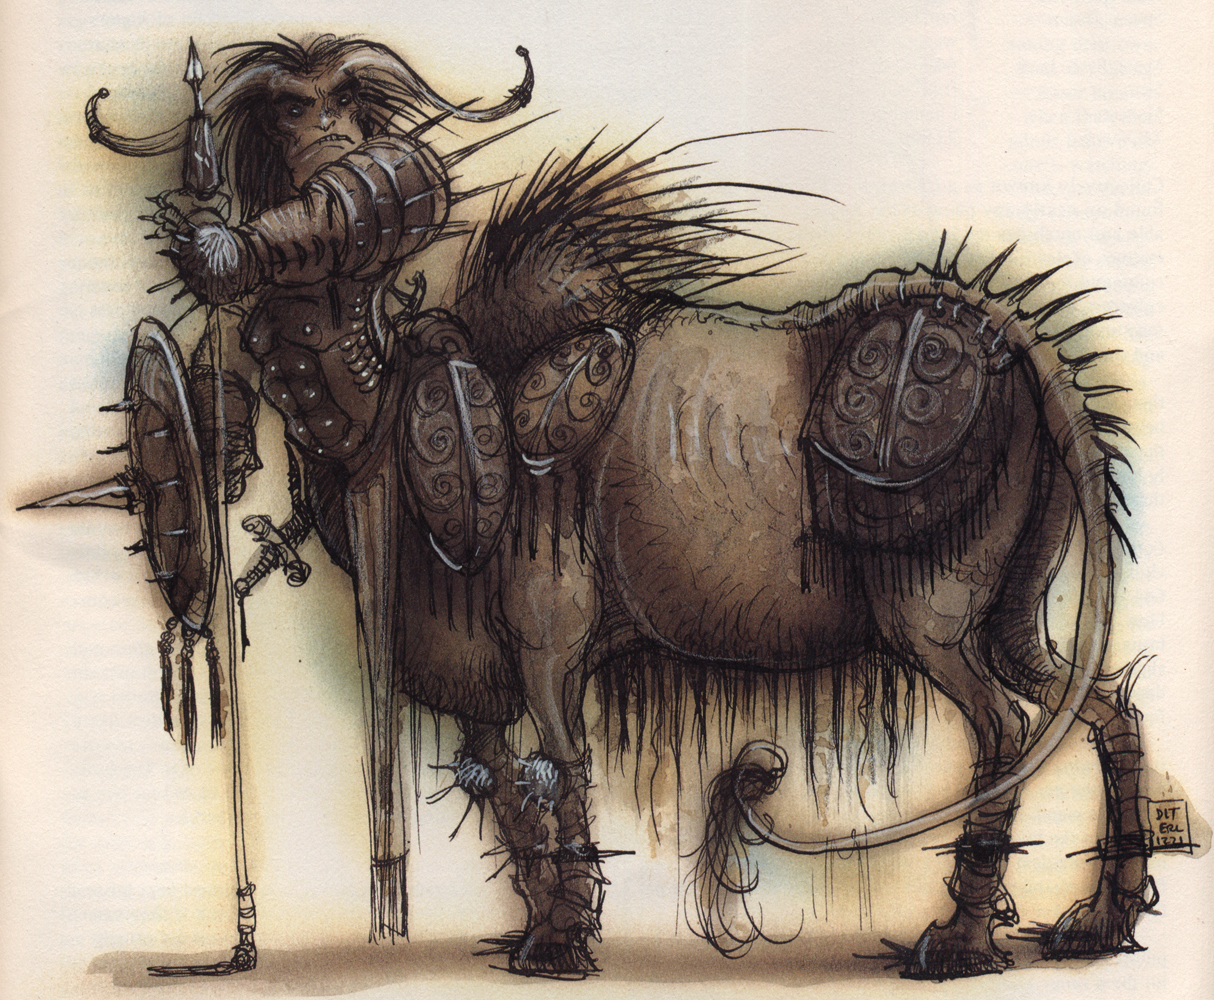 Armanites resemble pale, undead centaurs with the horns of rams or bulls. 